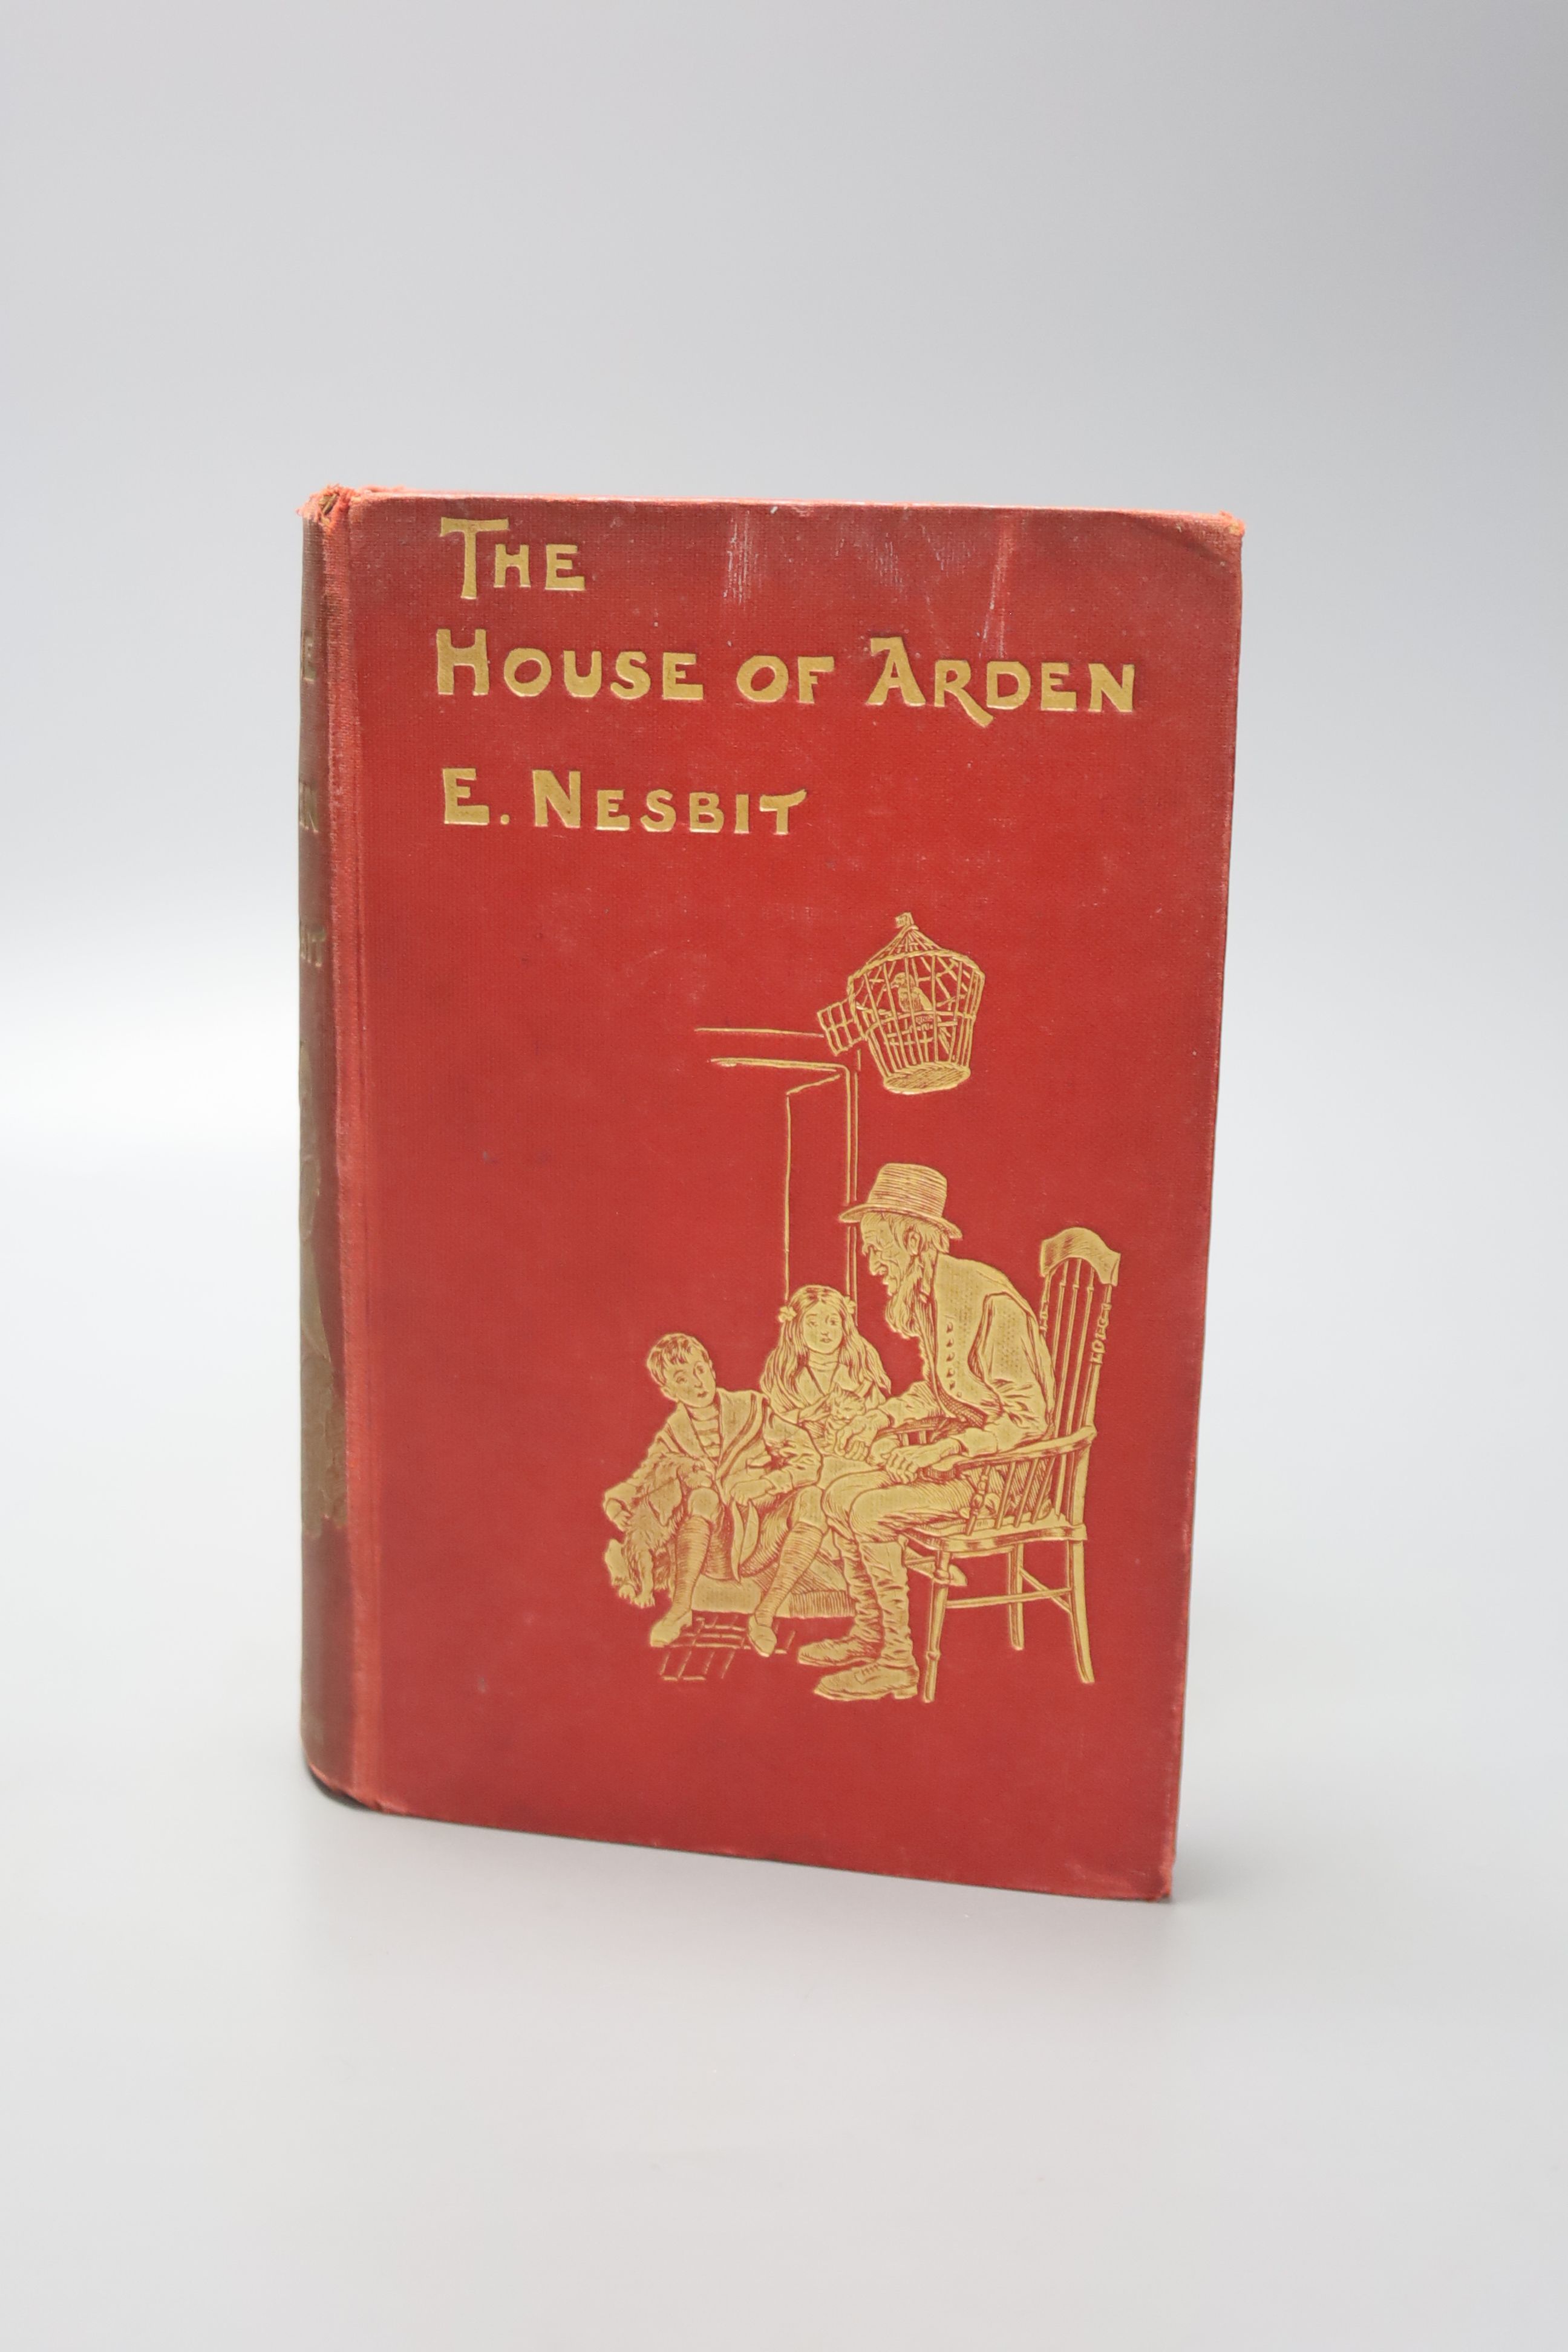 Nesbit, E, 'The House of Arden', 8vo, (no dj), first edition, illustrated by H.R. Millar, T. Fisher Unwin, London, 1908